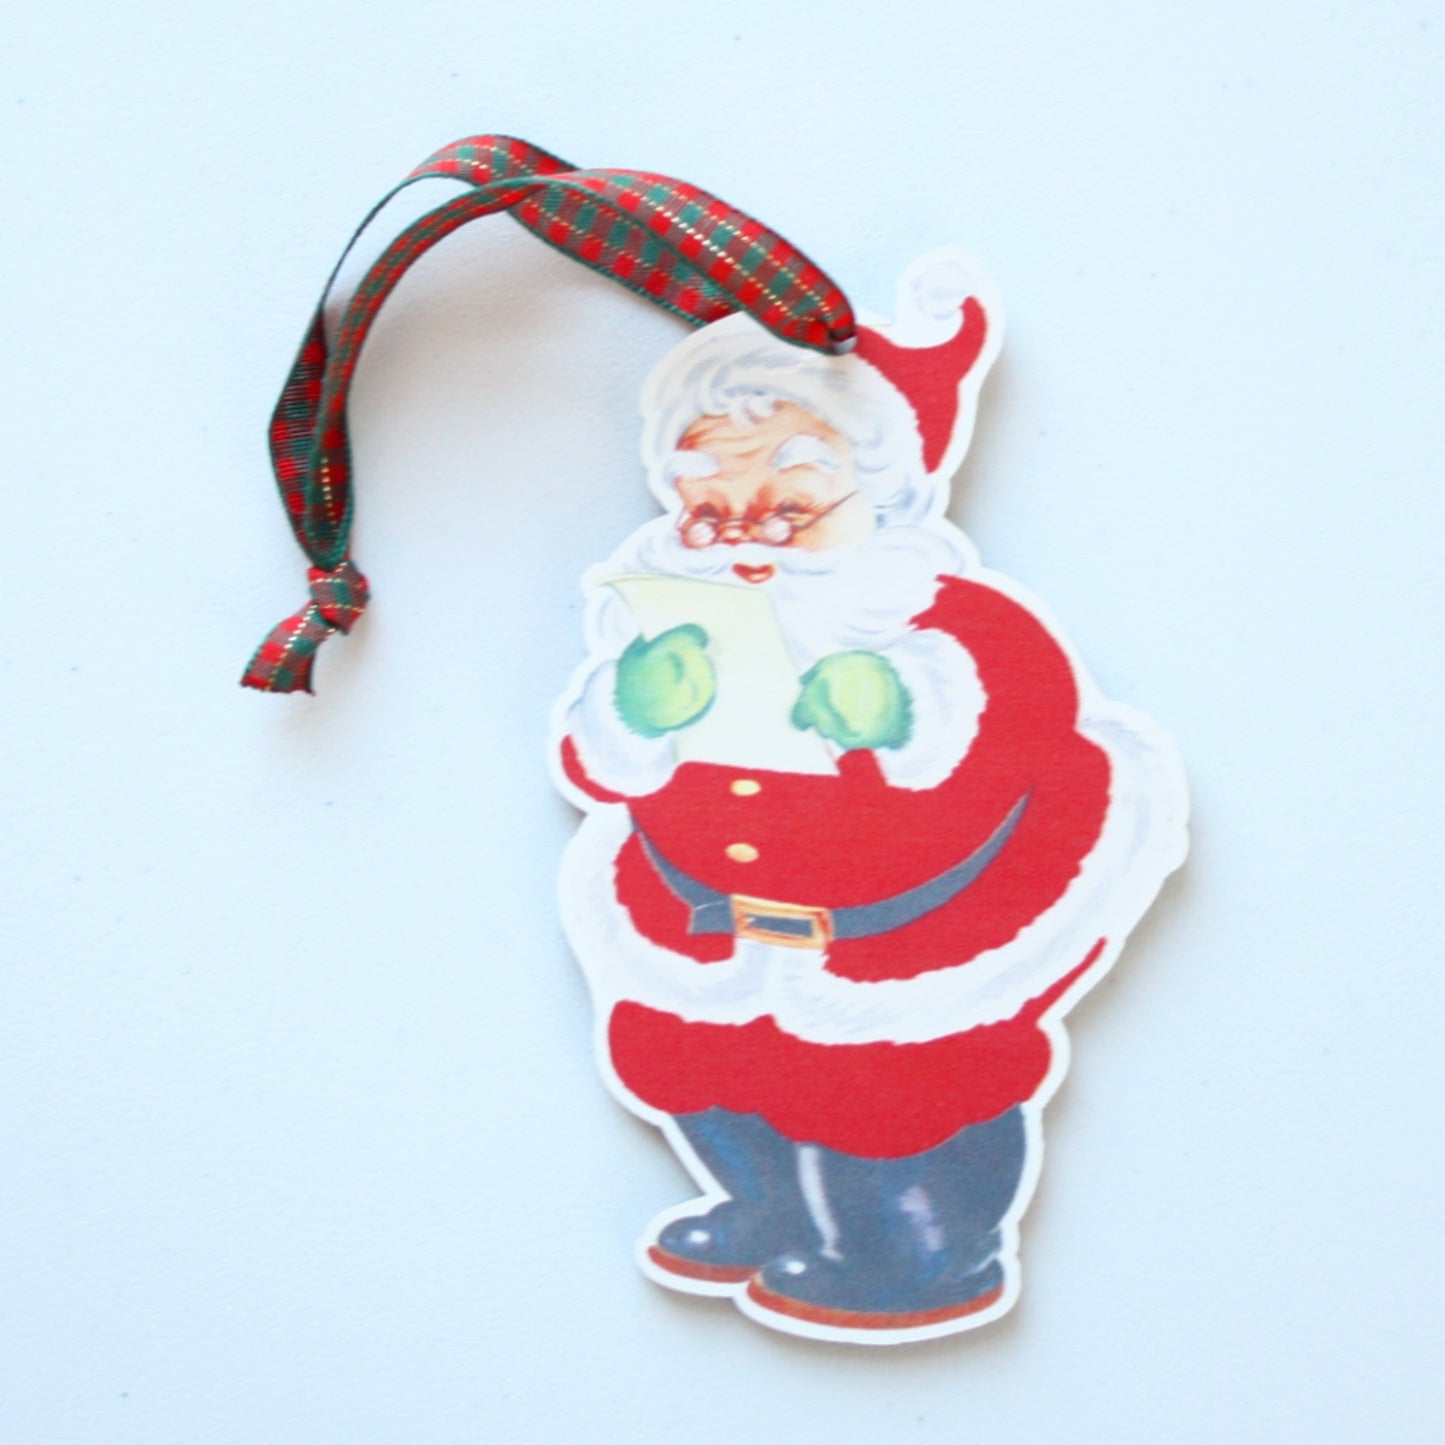 Vintage Style Santa Reading List - Wood Christmas Ornament - Made in the USA